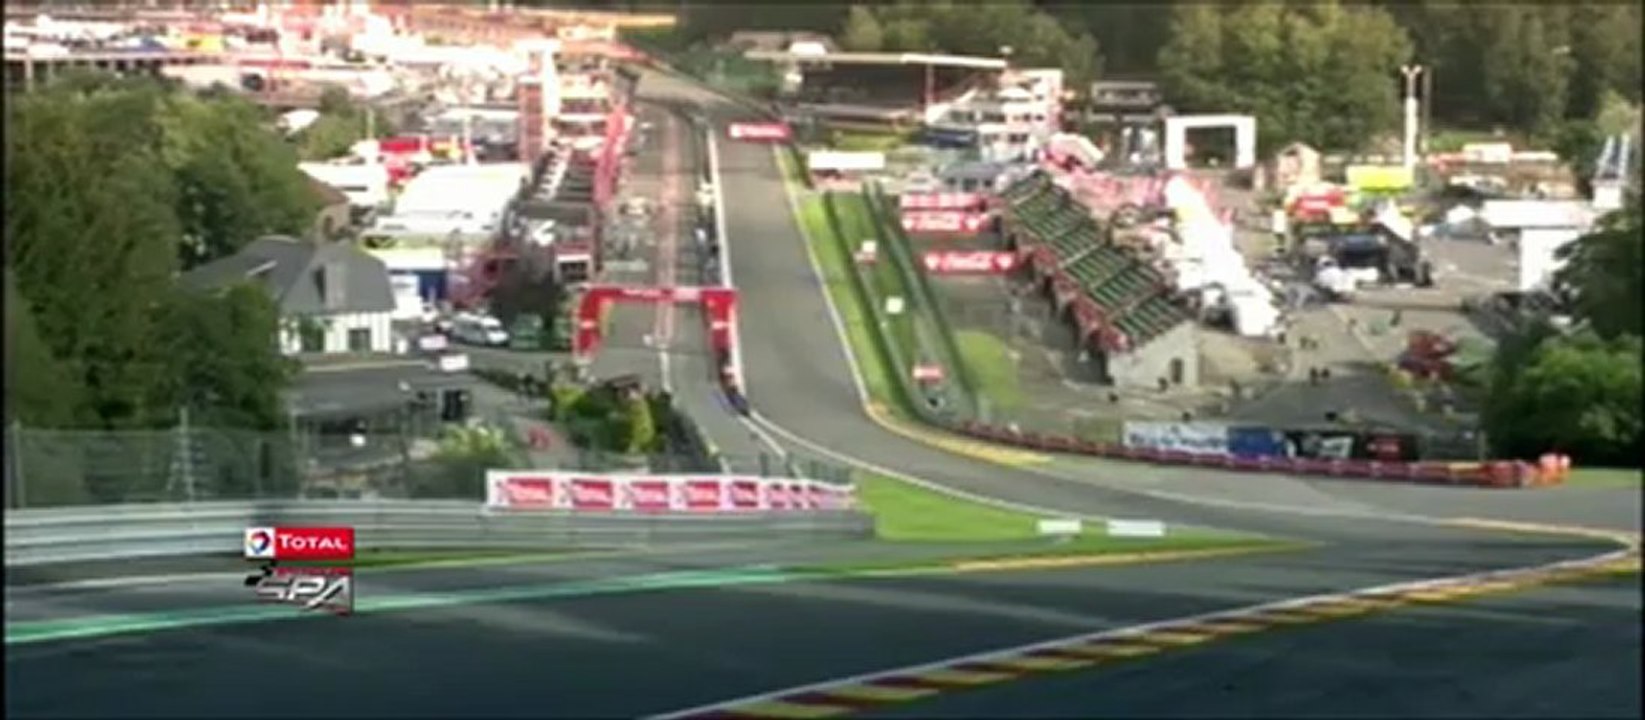 2012 TOTAL Spa 24 Hours Highlights